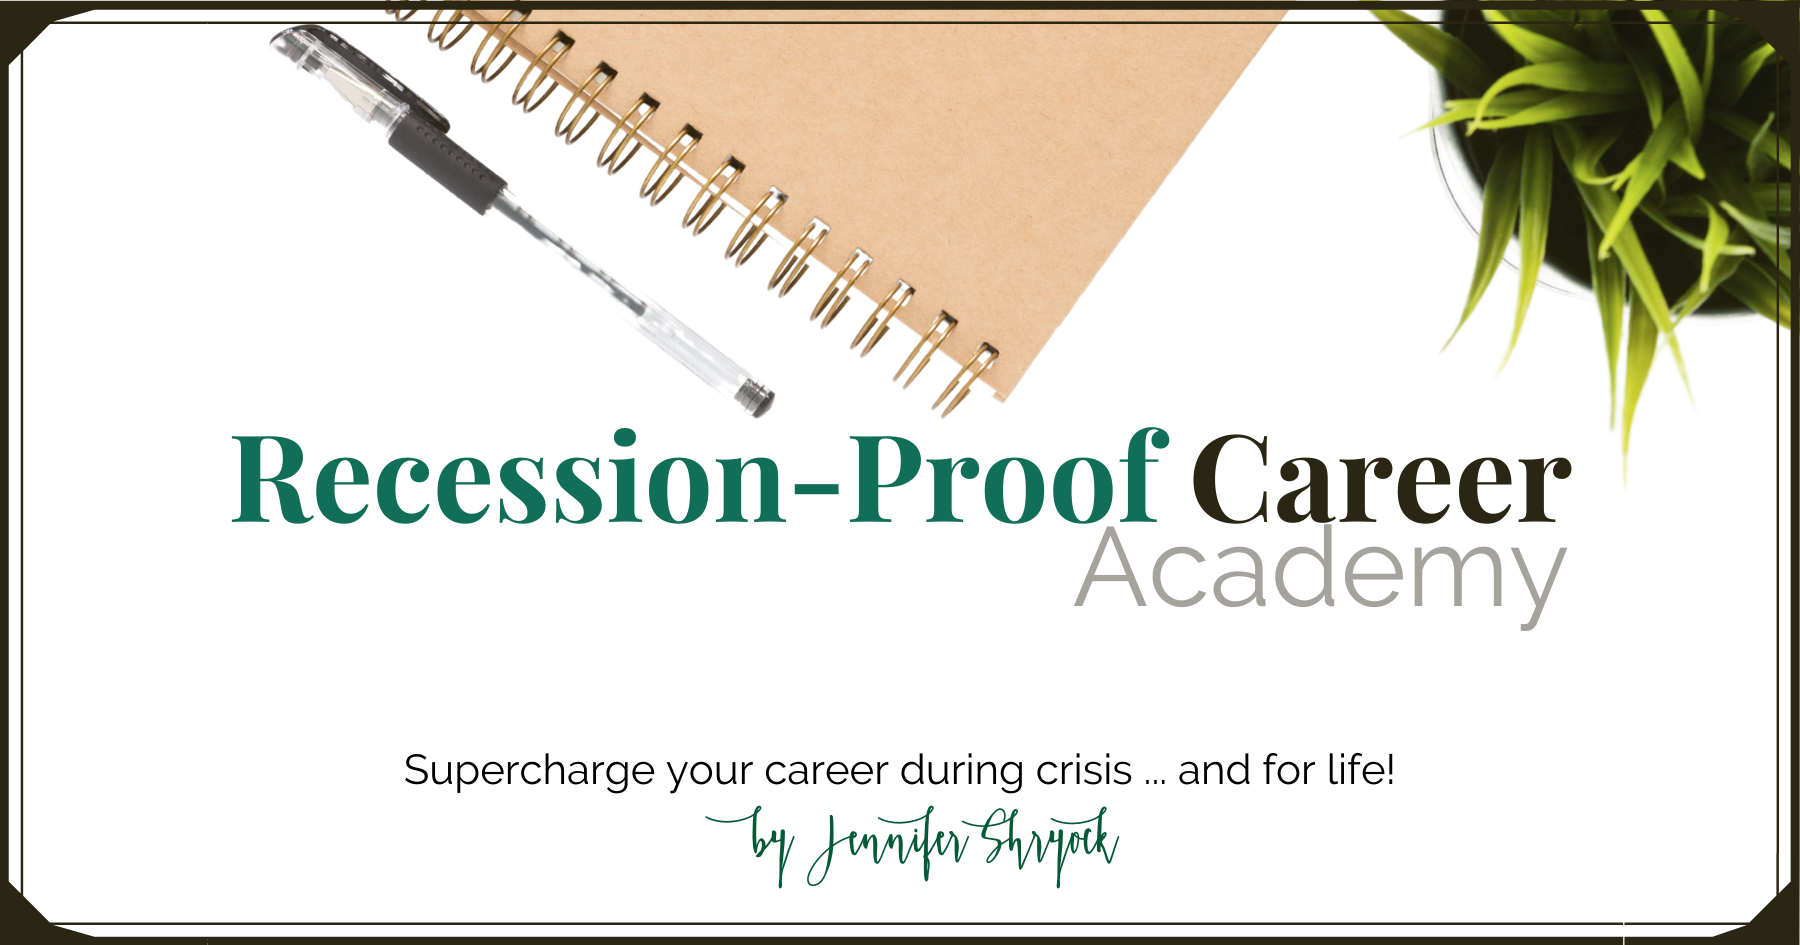 Recession-Proof Career